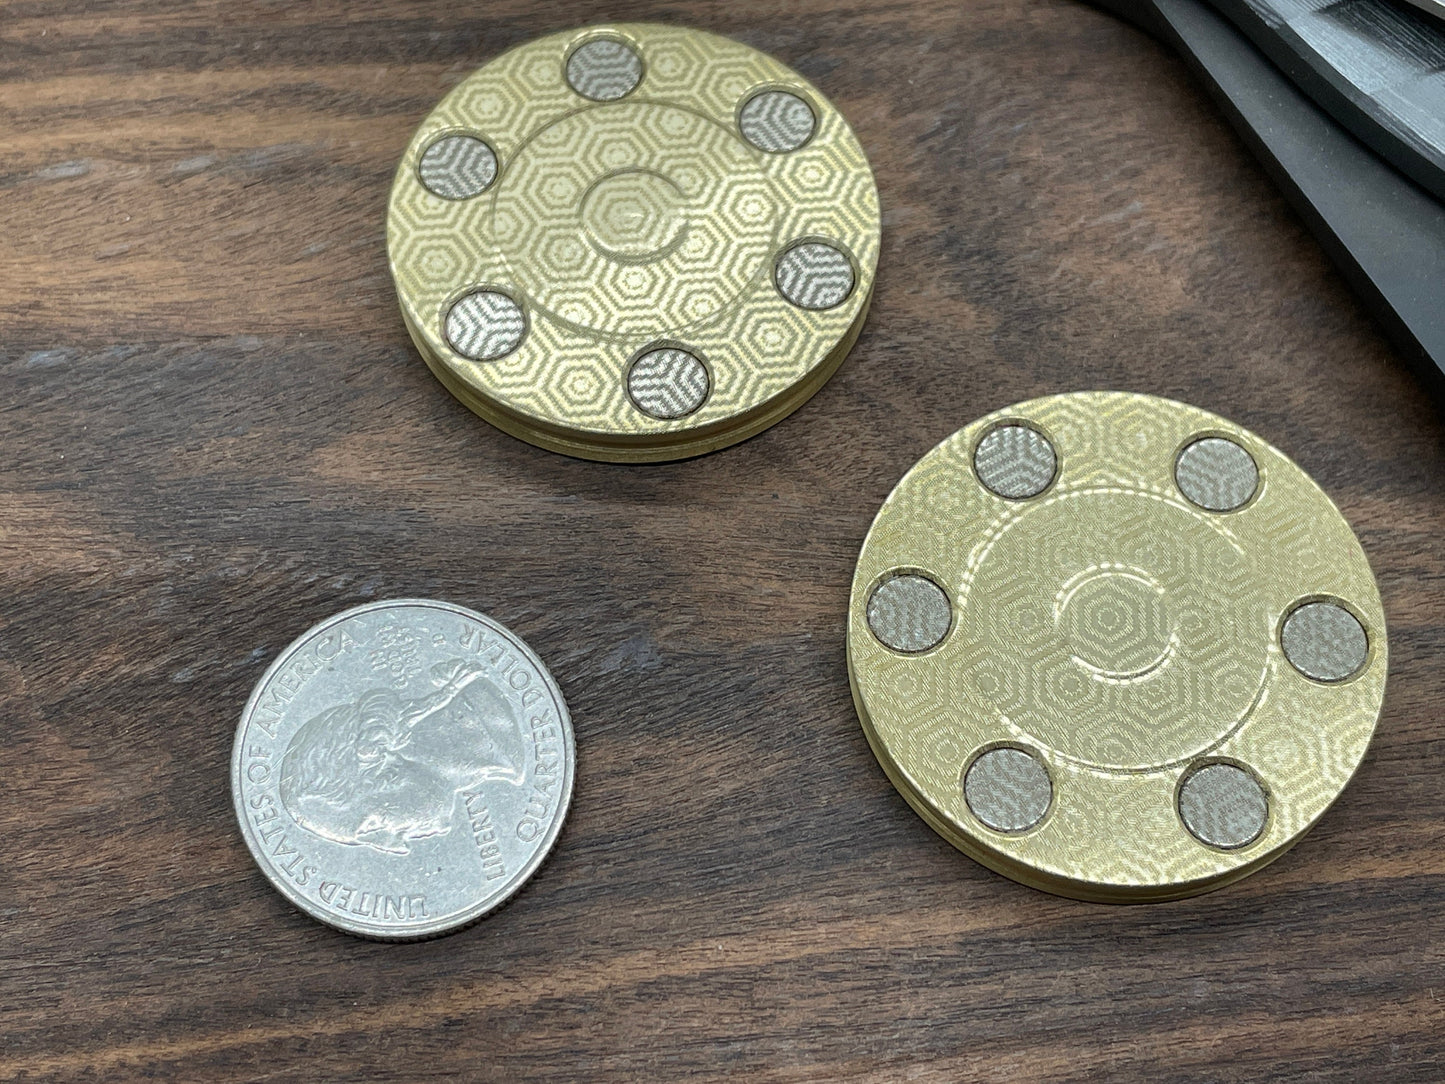 HAPTIC Coins CLICKY MYSTERY Copper Fidget